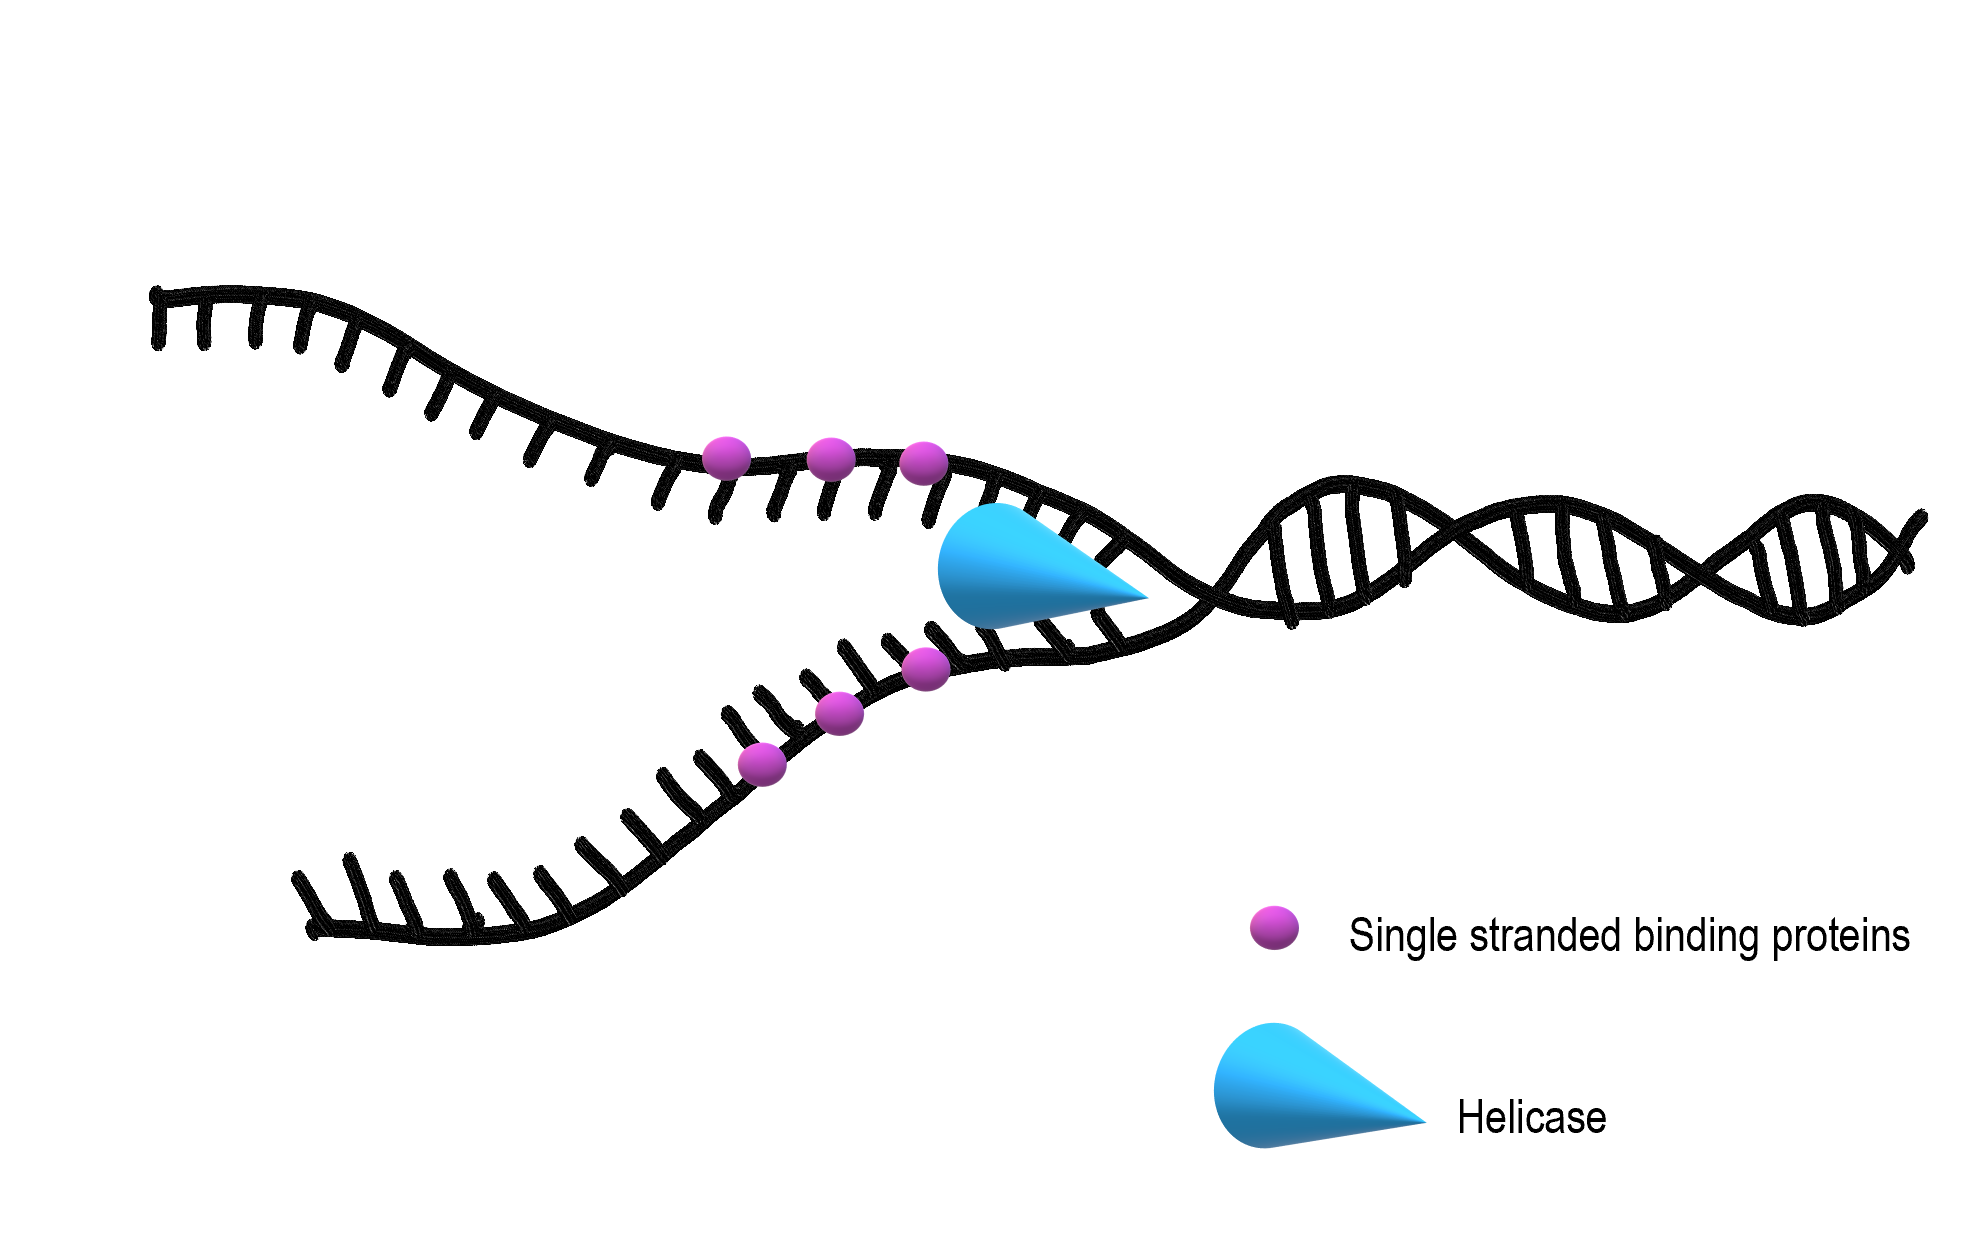 Image shows a diagram of helicase unwinding and unzipping a double stranded section of DNA. Single stranded binding proteins bind to the newly separated strands to prevent them from re-forming the hydrogen bonds.